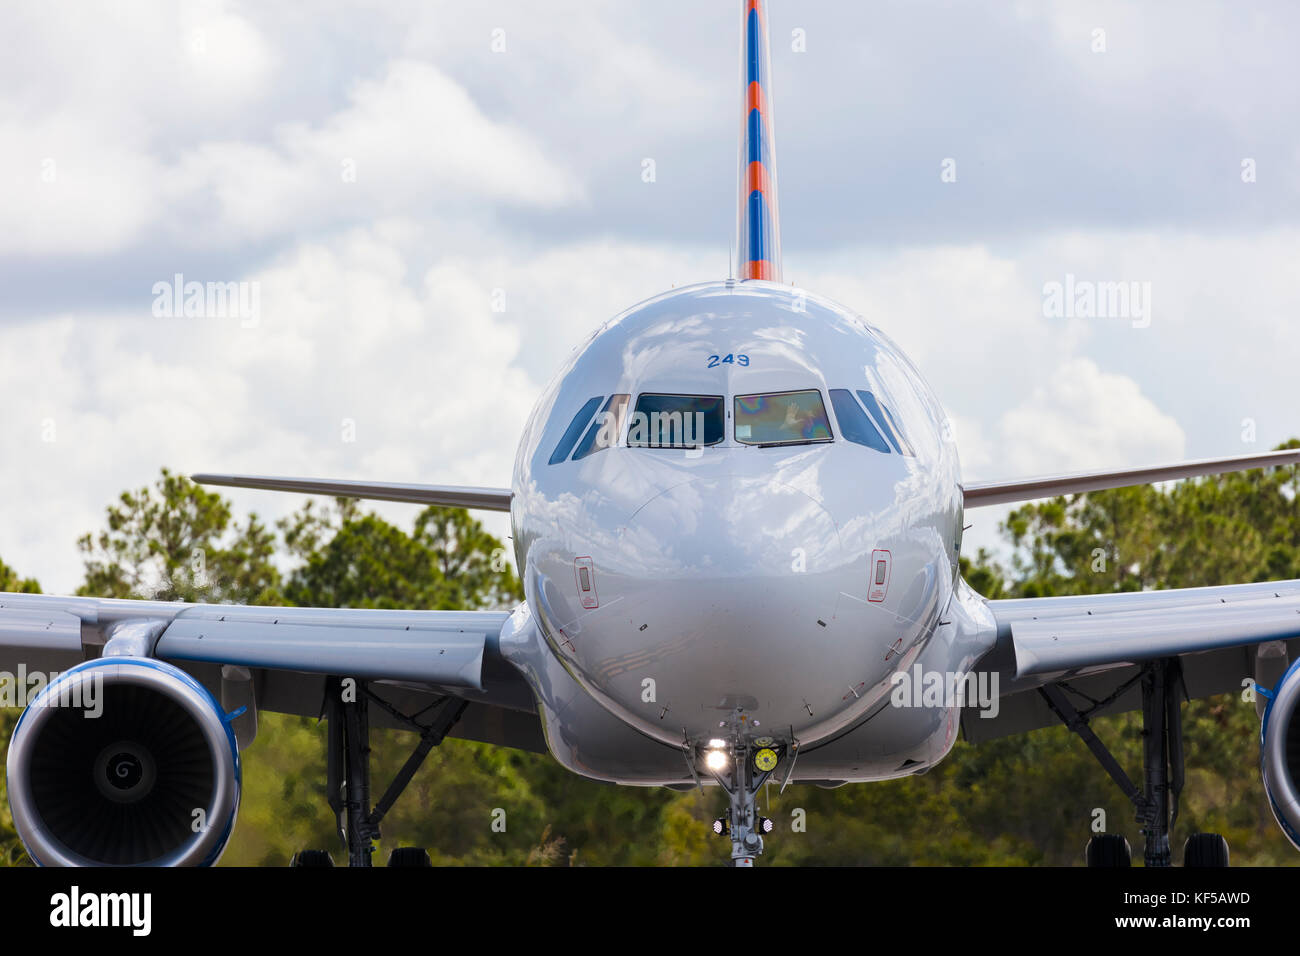 Allegiant commercial passenger airliner taxiing on ground at Punta Gorda Florida airport Stock Photo